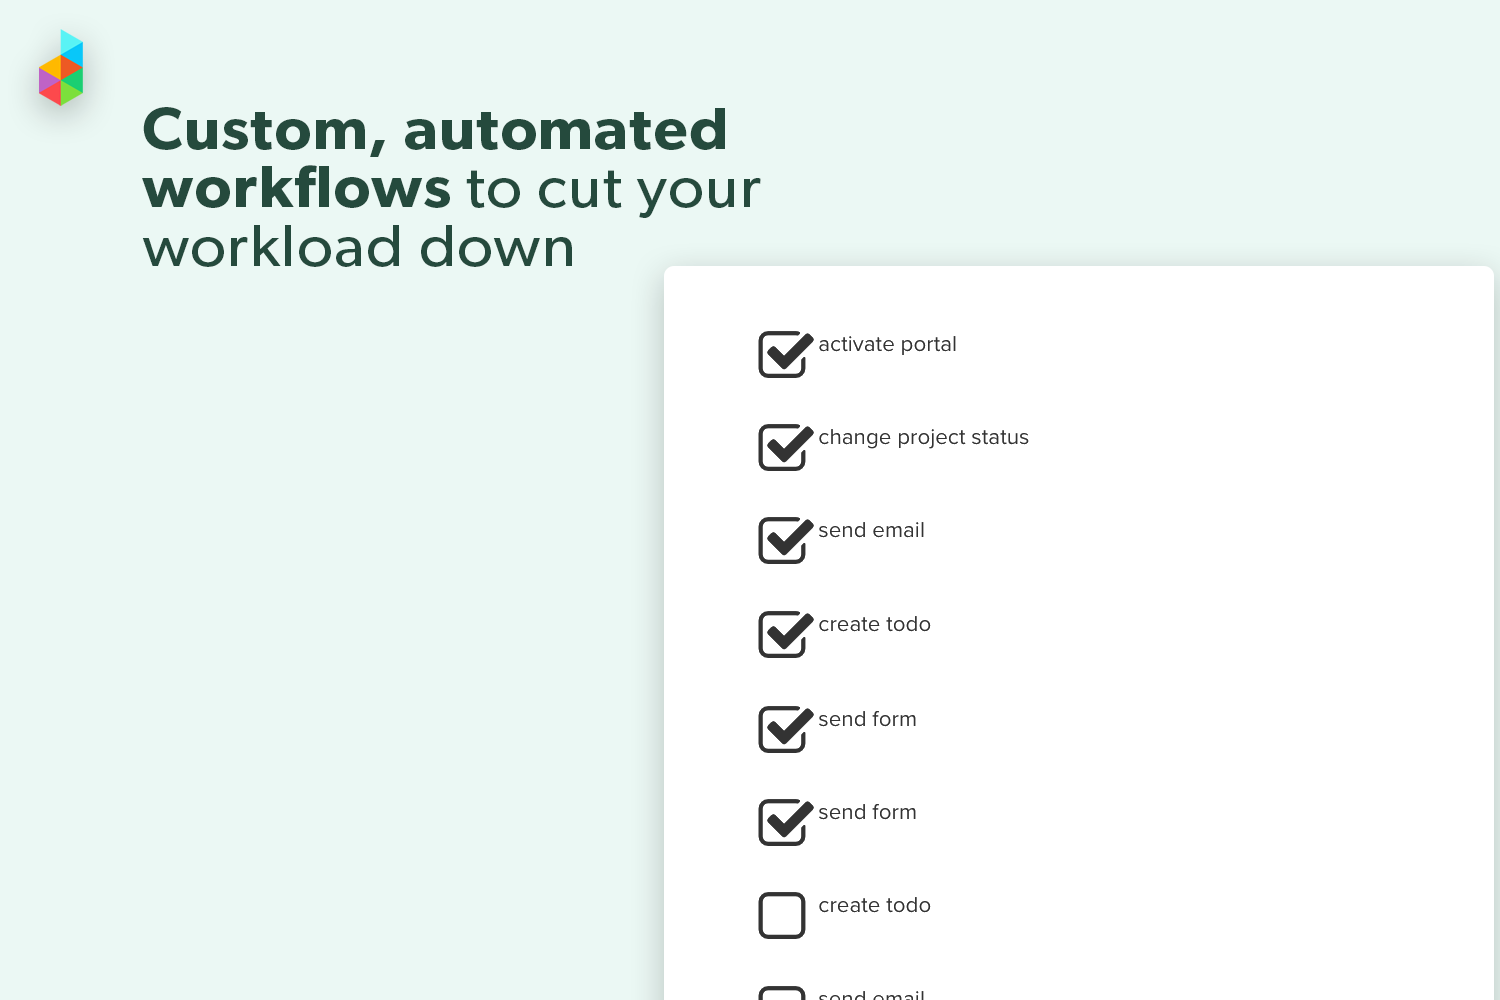 Dubsado Software - Text: "Custom, automated workflows to cut your workload down." Image: 8-step workflow with the first 7 checked to mark complete